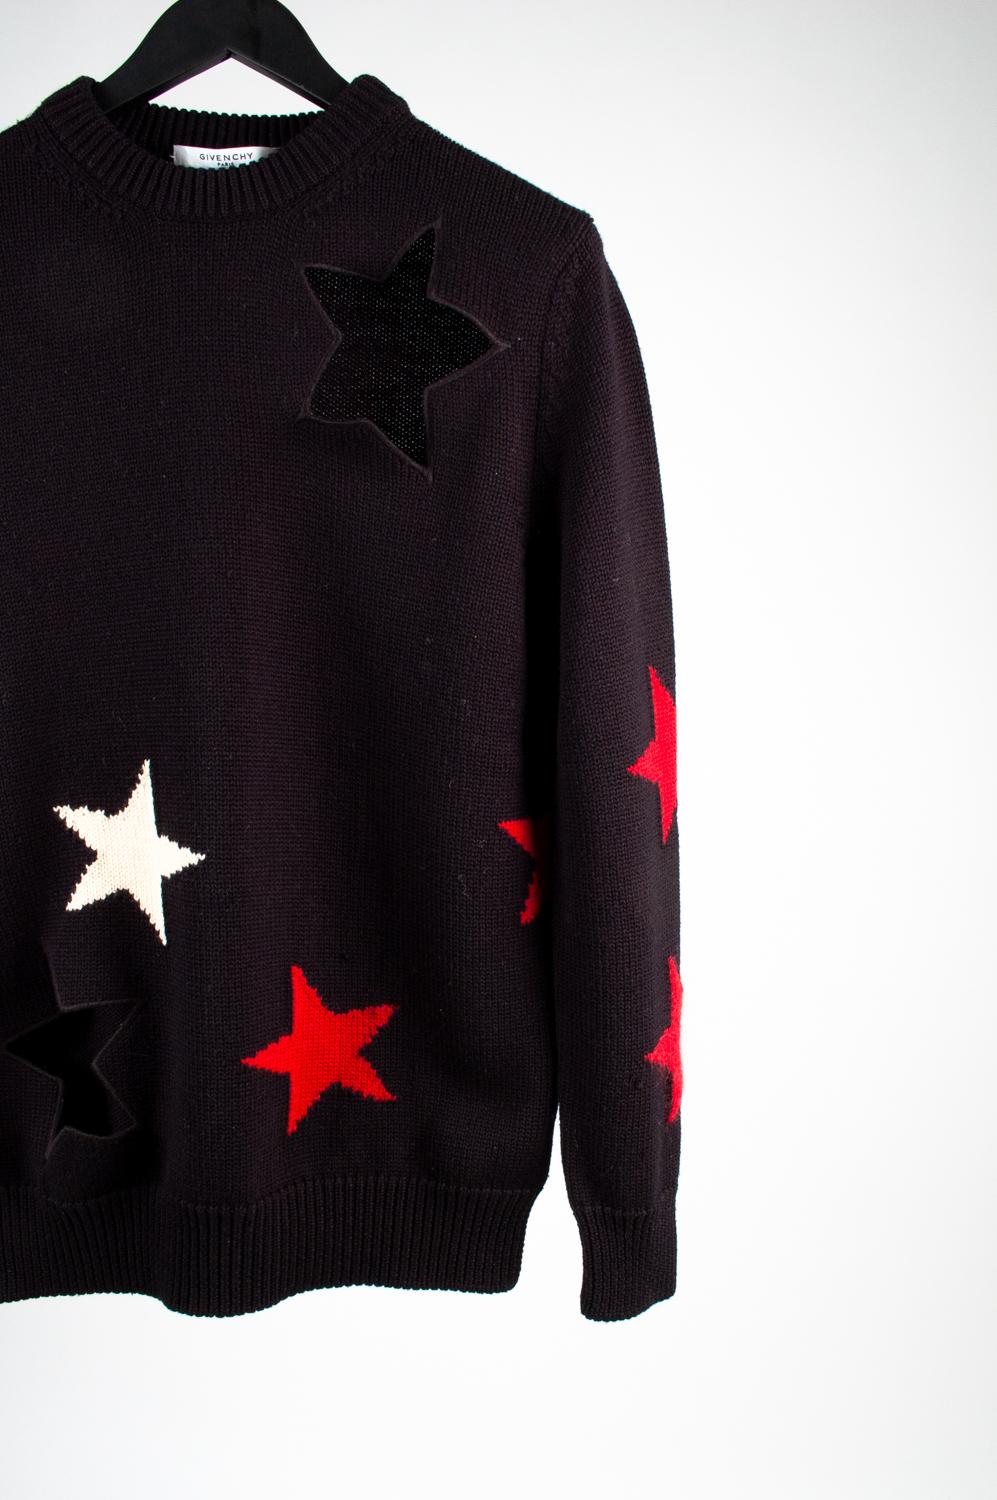 100% genuine Givenchy Paris Men Sweater, S530
Color: Black/Red and White Stars
(An actual color may a bit vary due to individual computer screen interpretation)
Material: Wool
Tag size: S, runs Medium
This sweater is great quality item. Rate 9 of